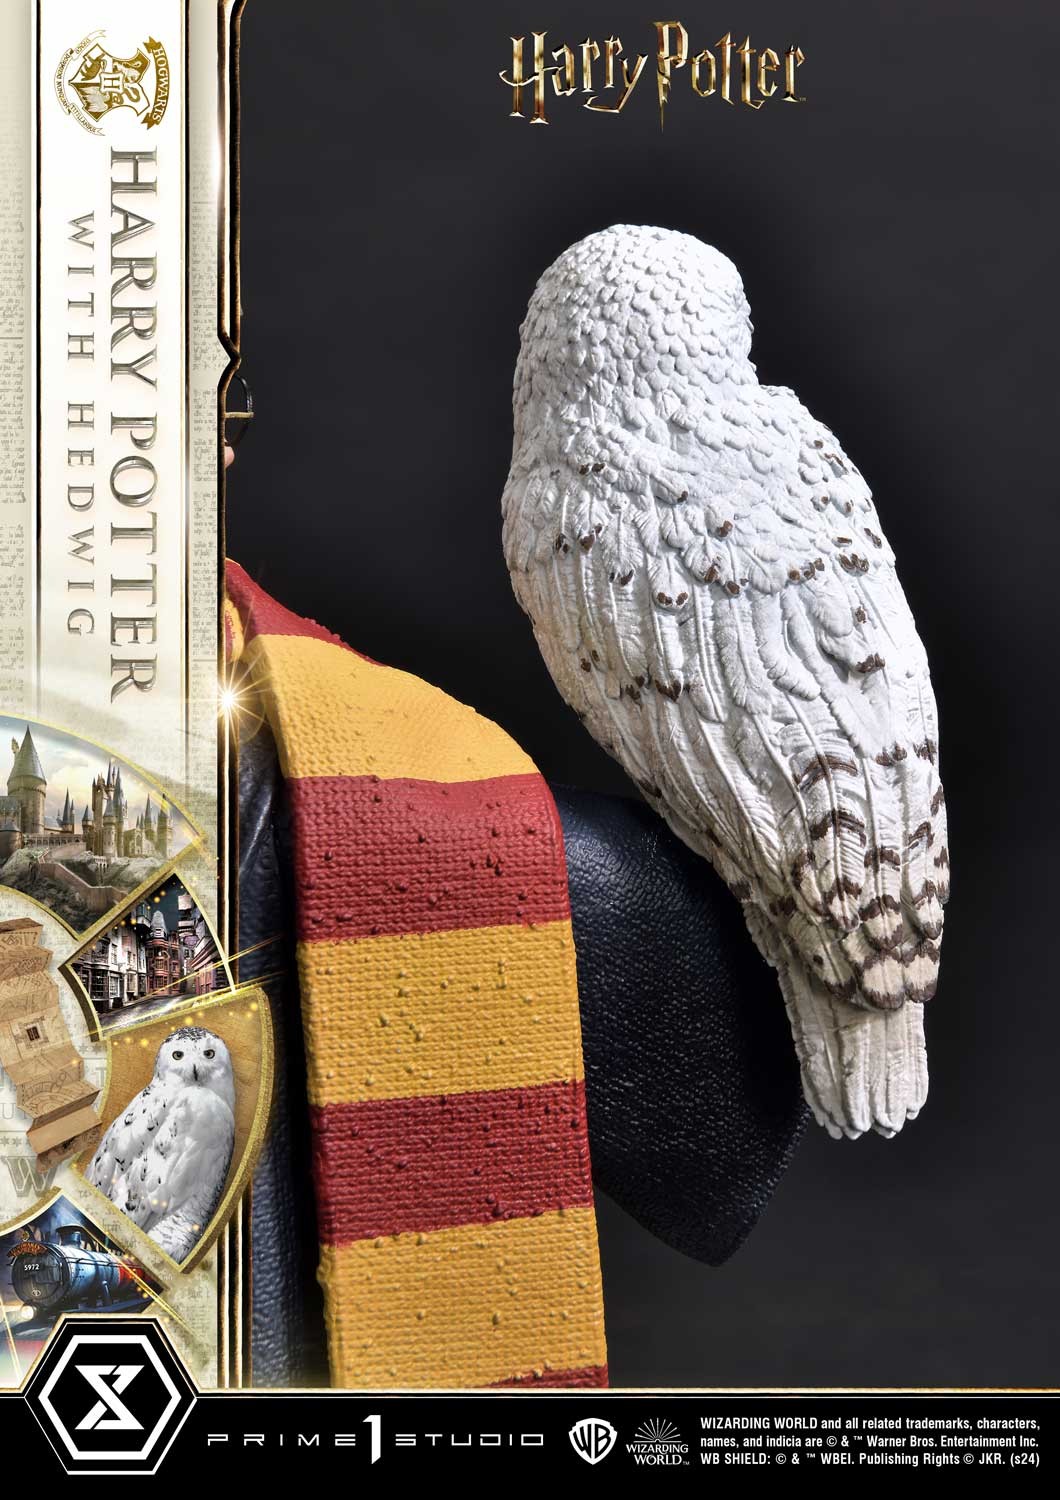 Harry Potter With Hedwig (Prototype Shown) View 21